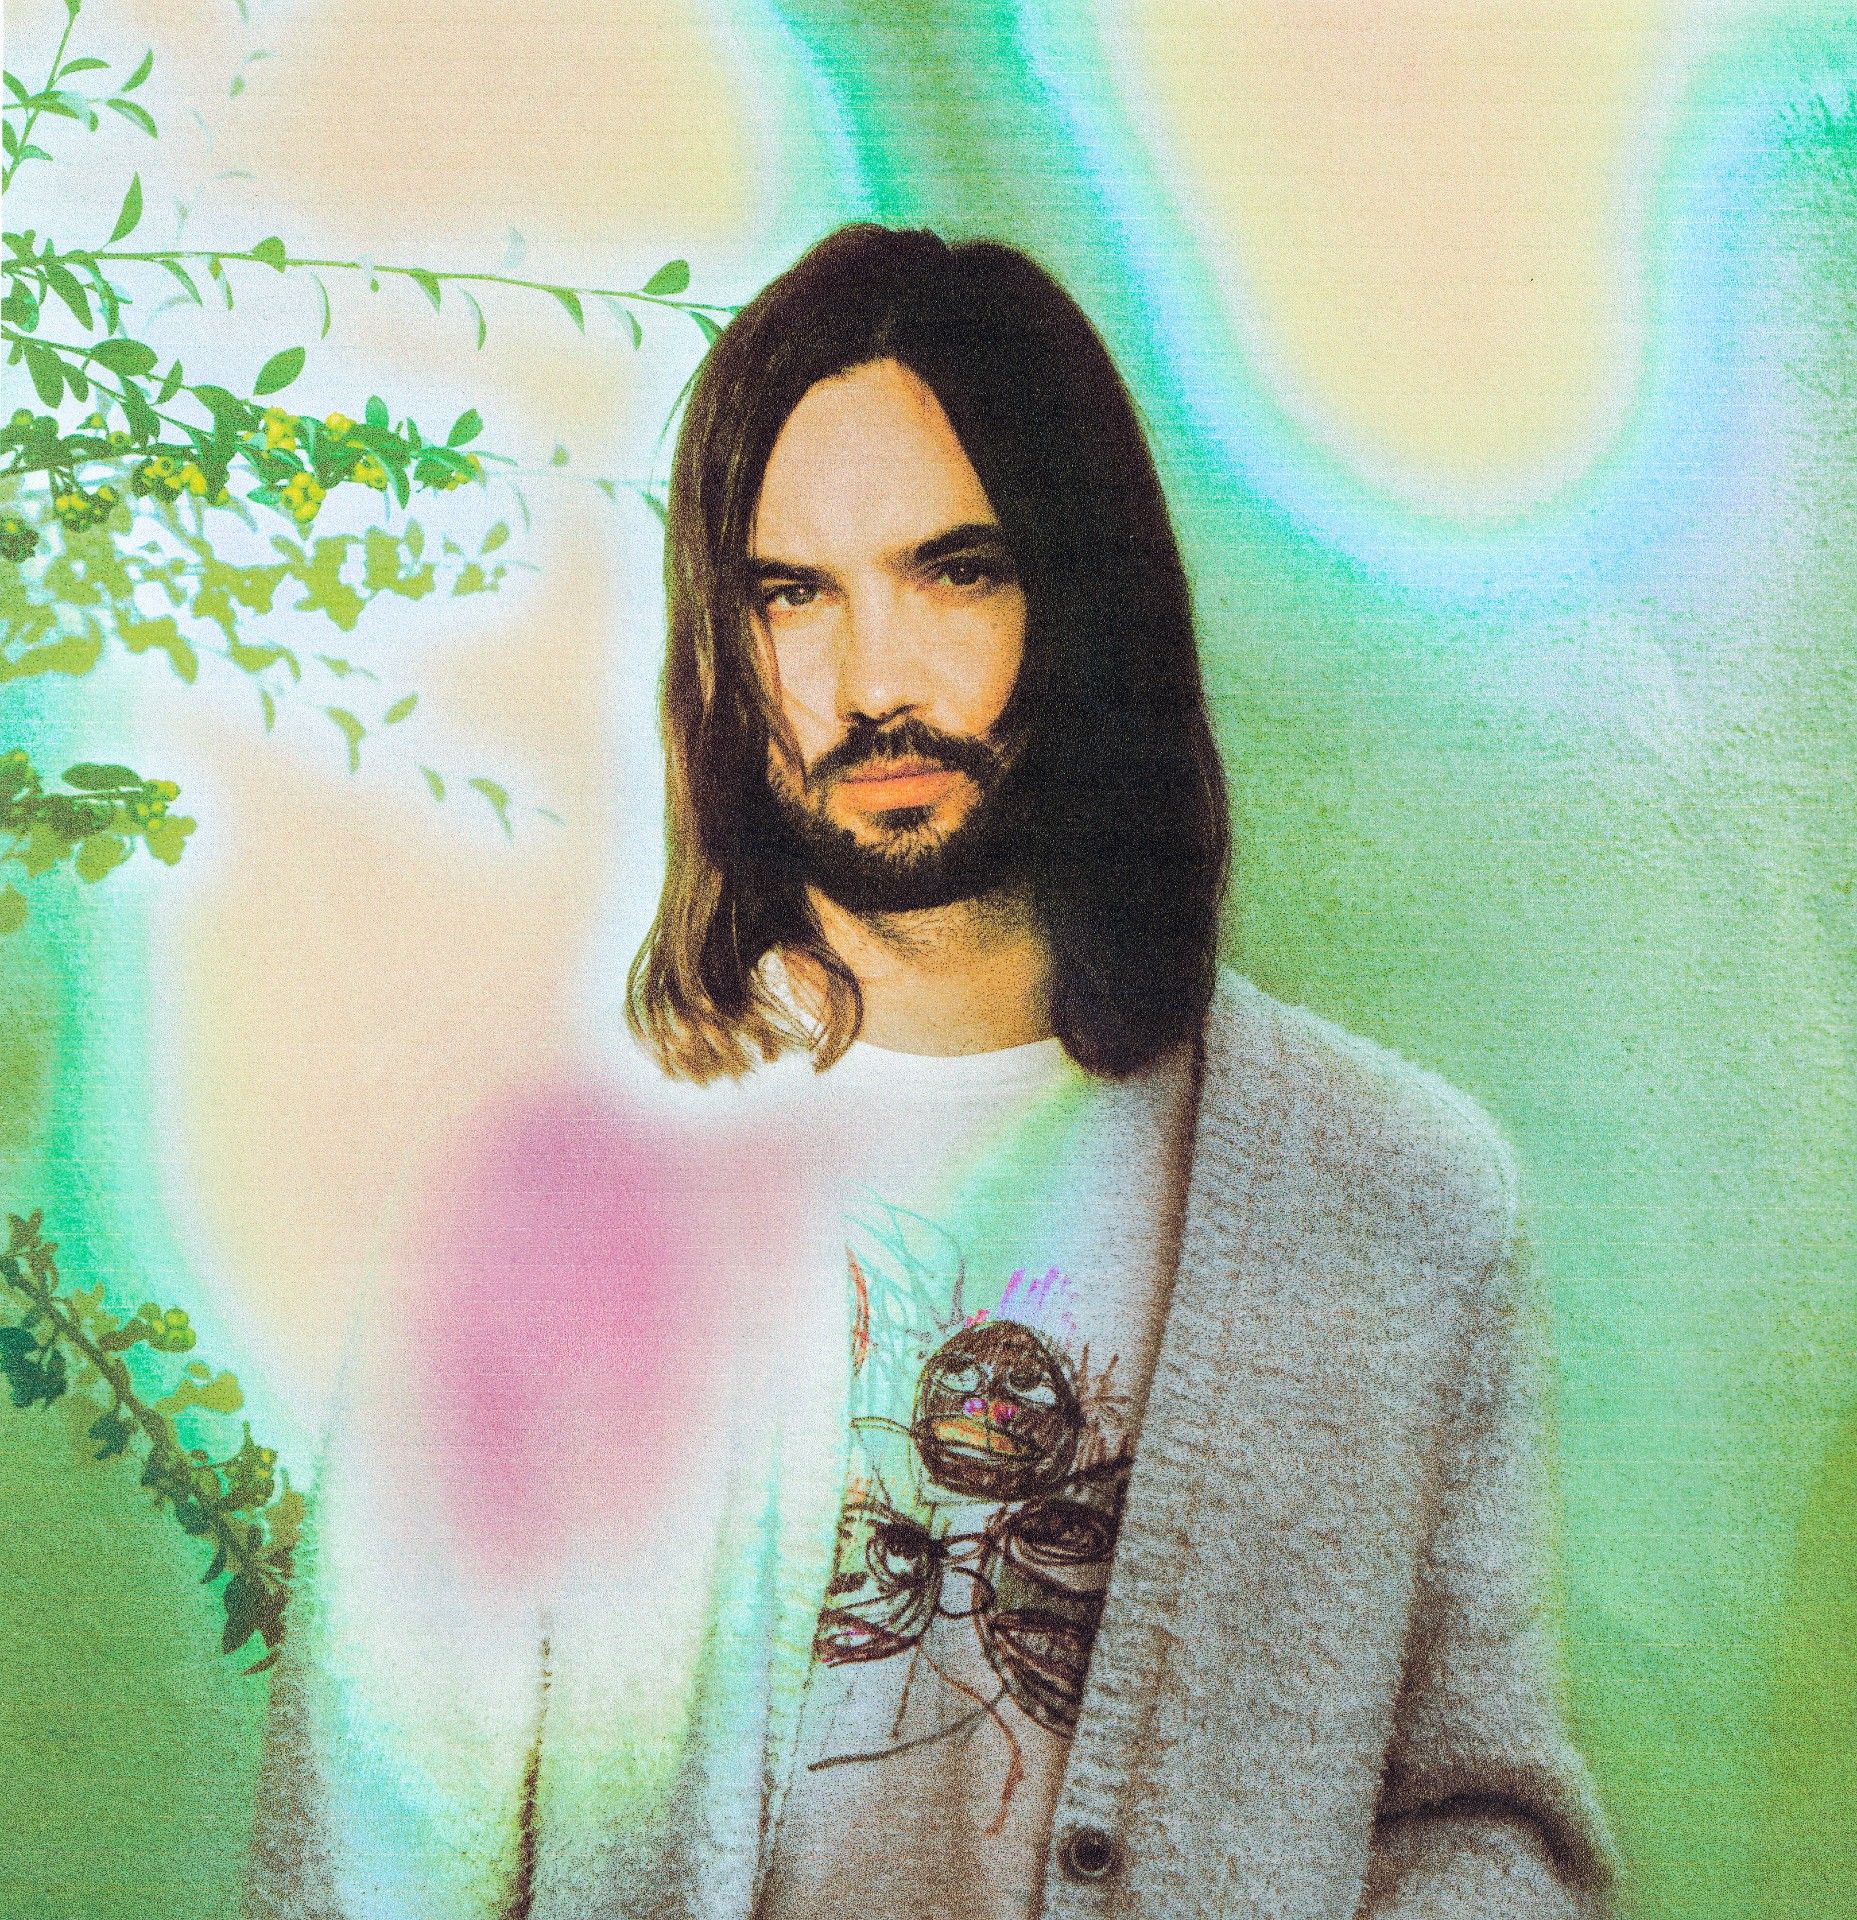 Tame Impala Shares New Single ‘No Choice’ + The Slow Rush Deluxe Box Set +  Tour Dates Announced